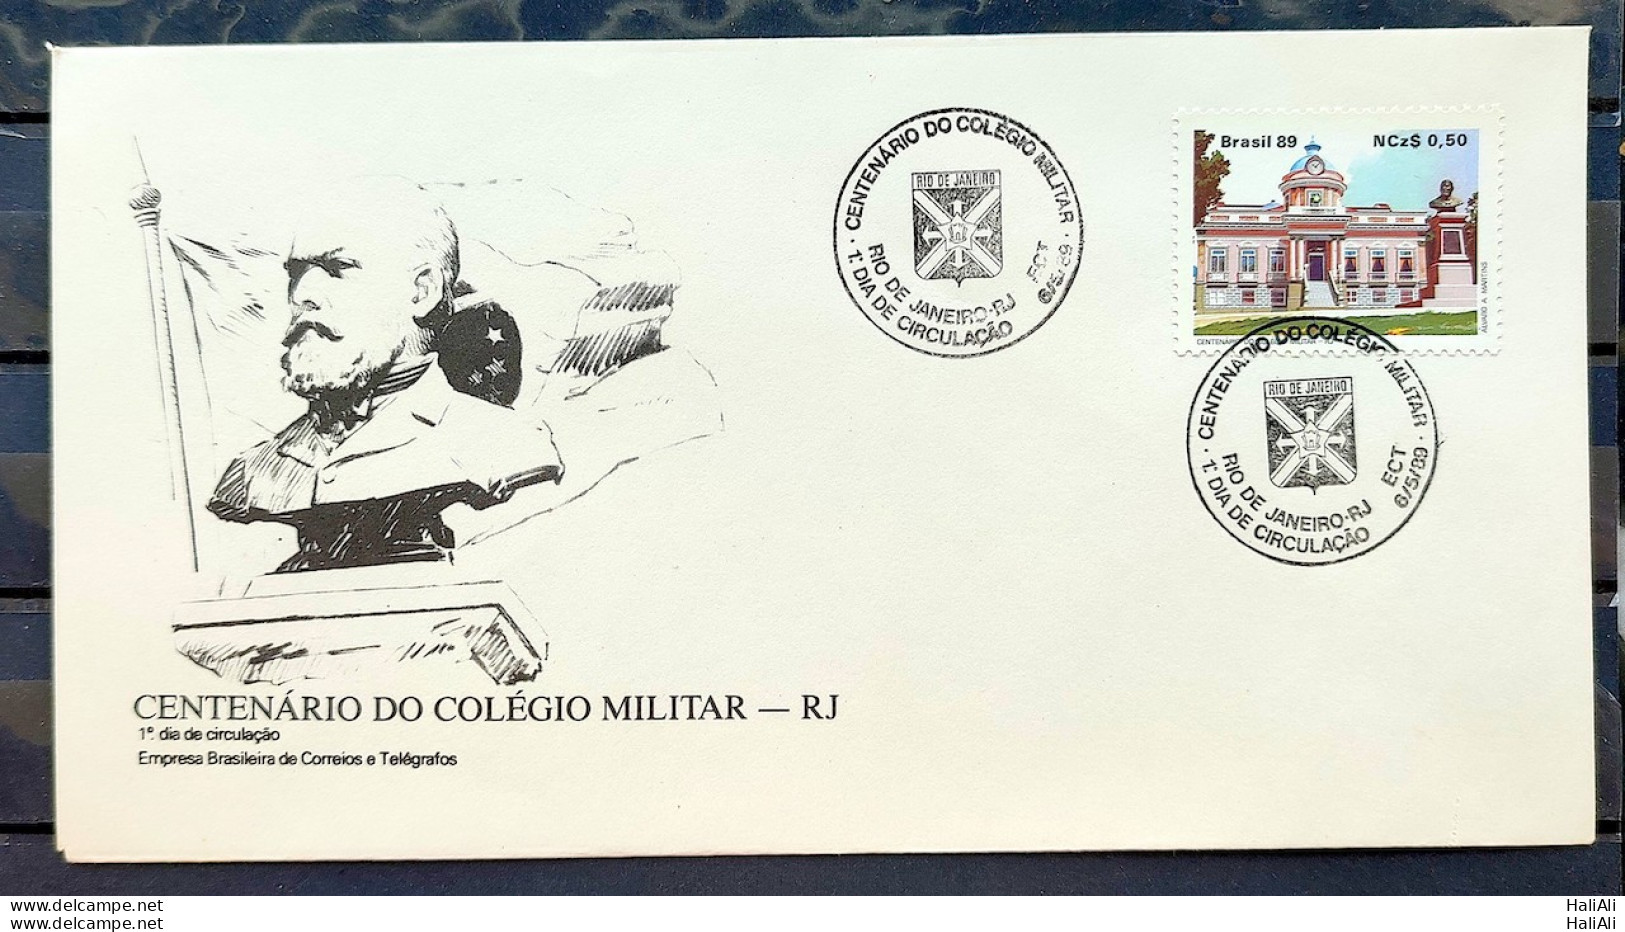 Brazil Envelope FDC 468 1989 MILITARY COLLEGE EDUCATION CBC RJ 02 - Used Stamps